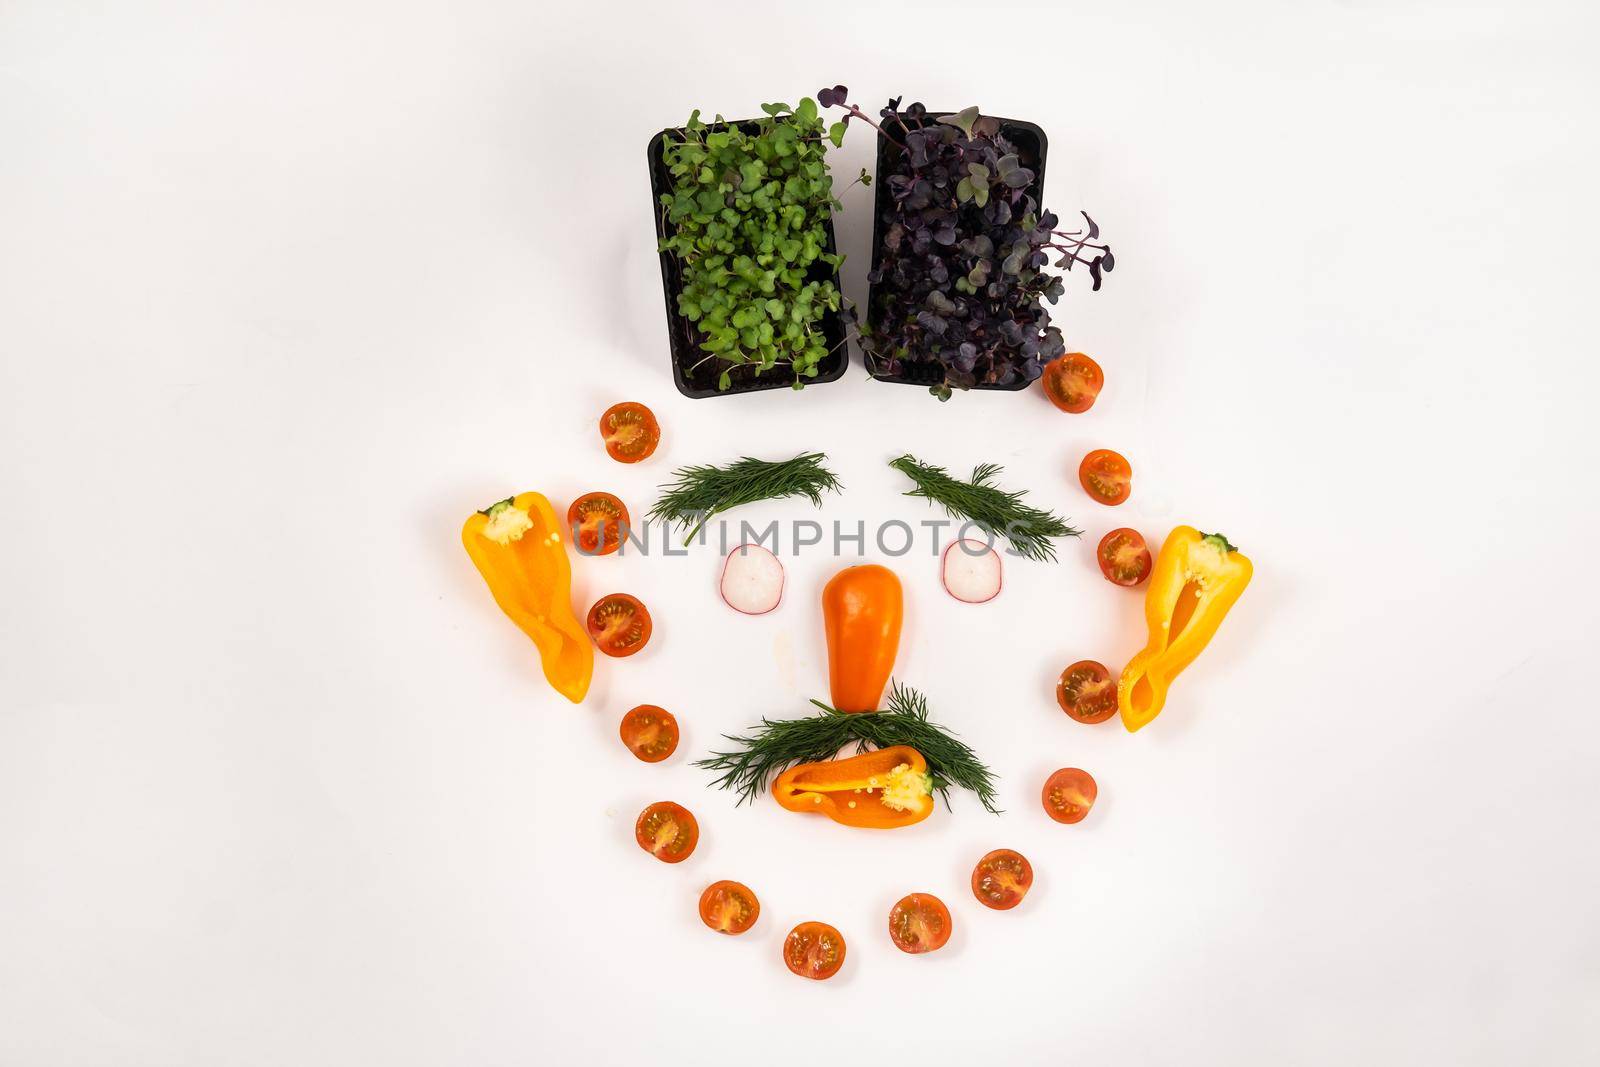 A person s face made of vegetables on a white background by Lobachad